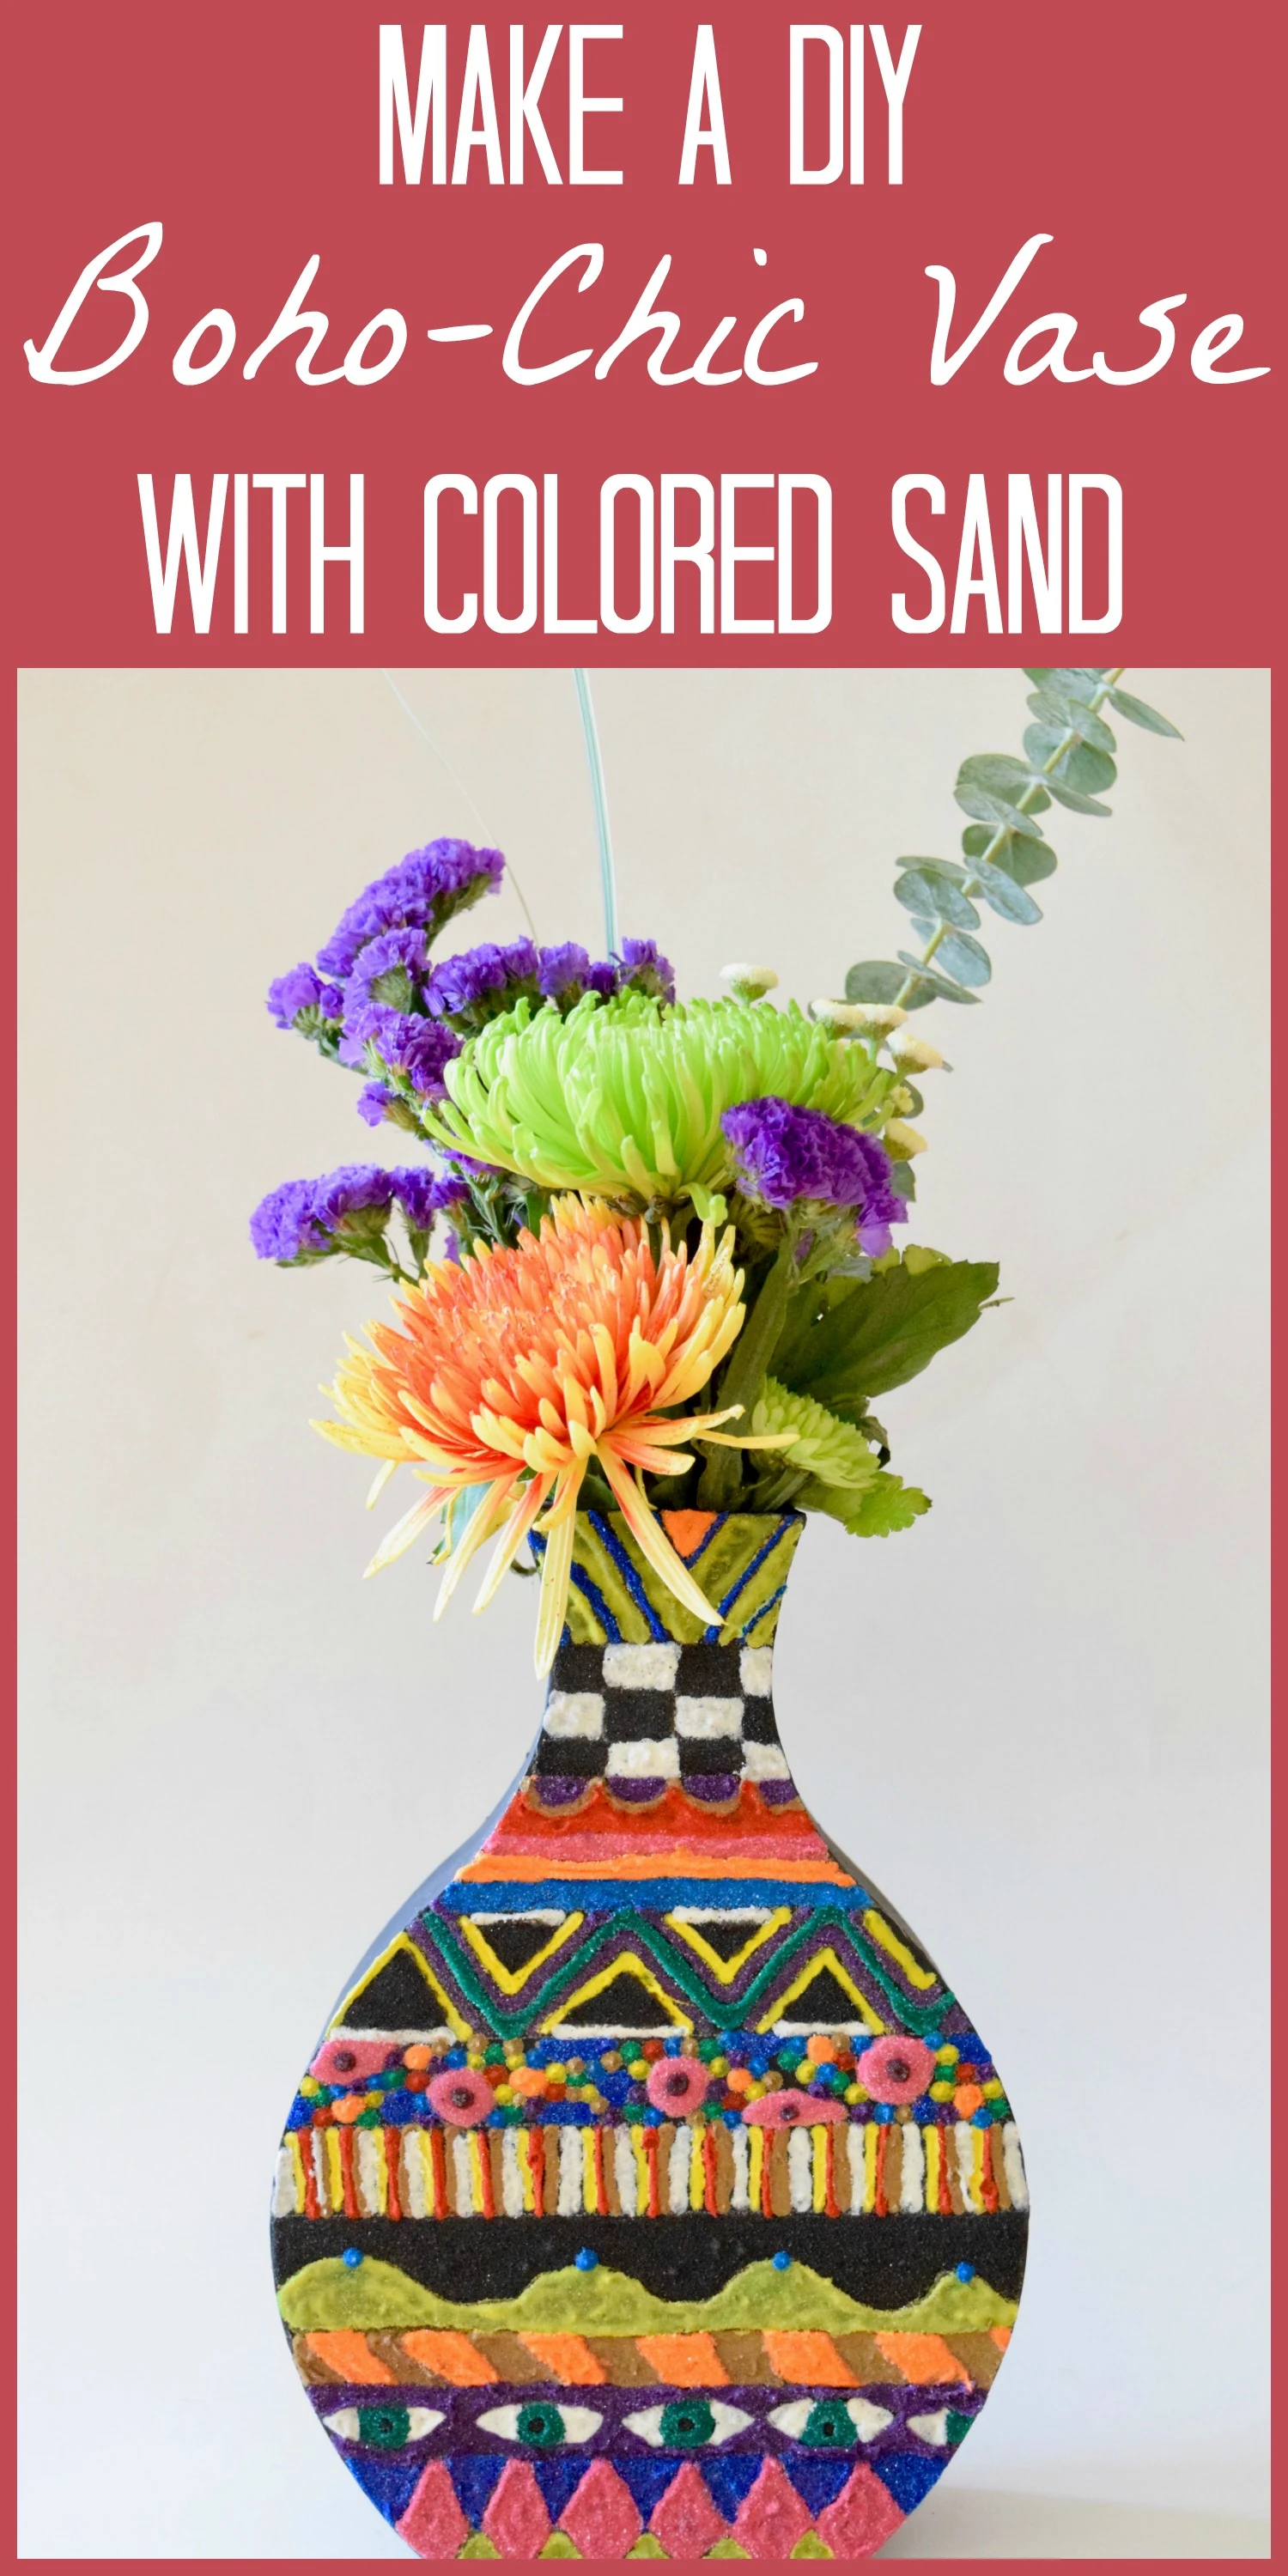 Learn how to make a boho-chic vase with colored sand! This tutorial will show you exactly how to make a sand vase and get this colorful, bohemian look!